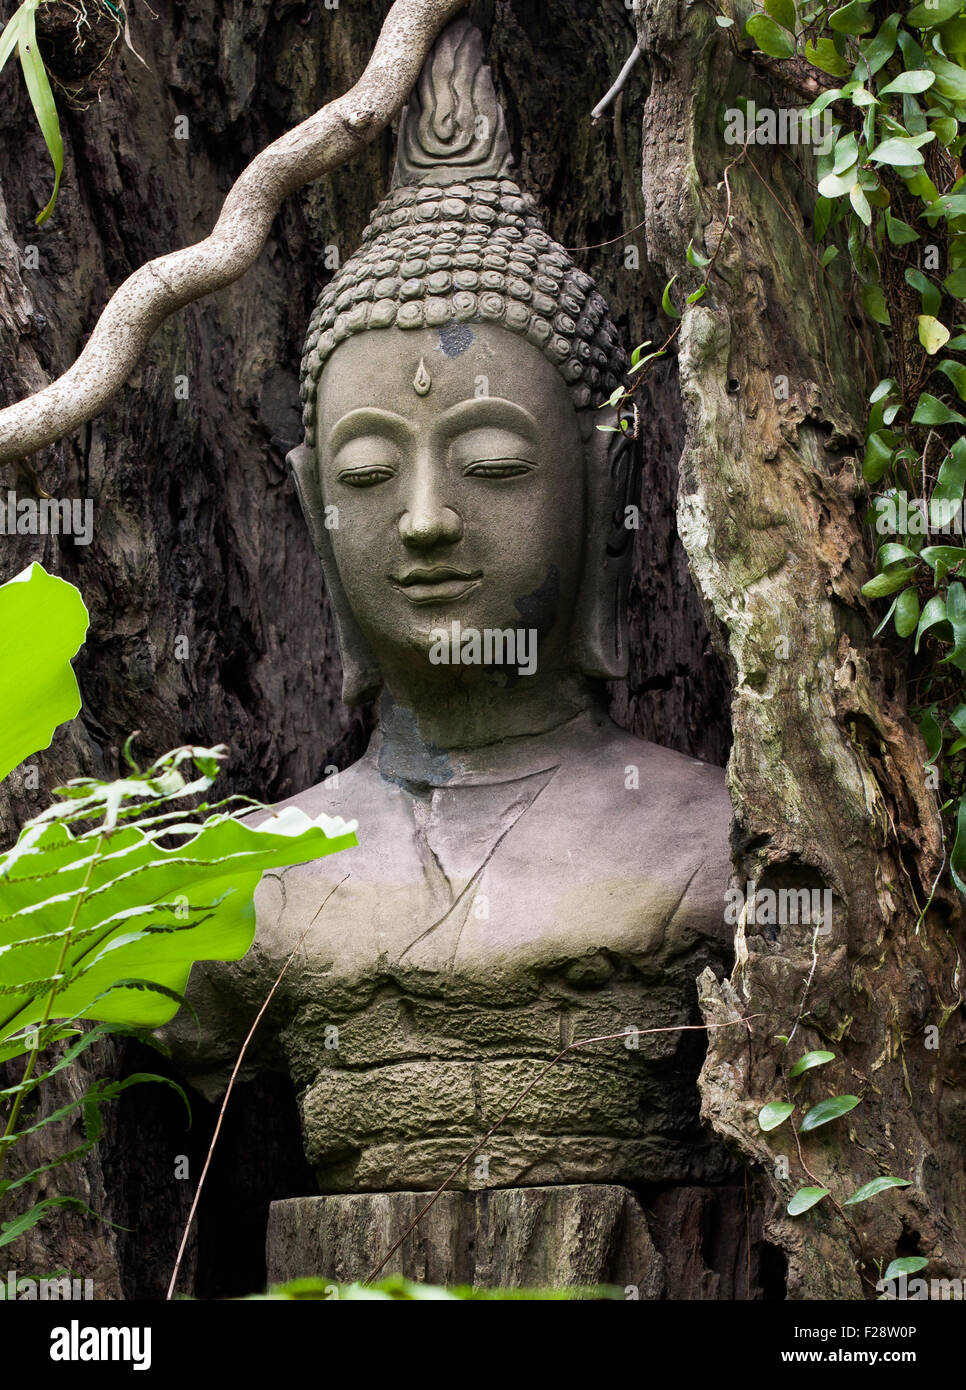 Buddha face head statue stucco covered by dead tree timber in ancient Thailand Stock Photo